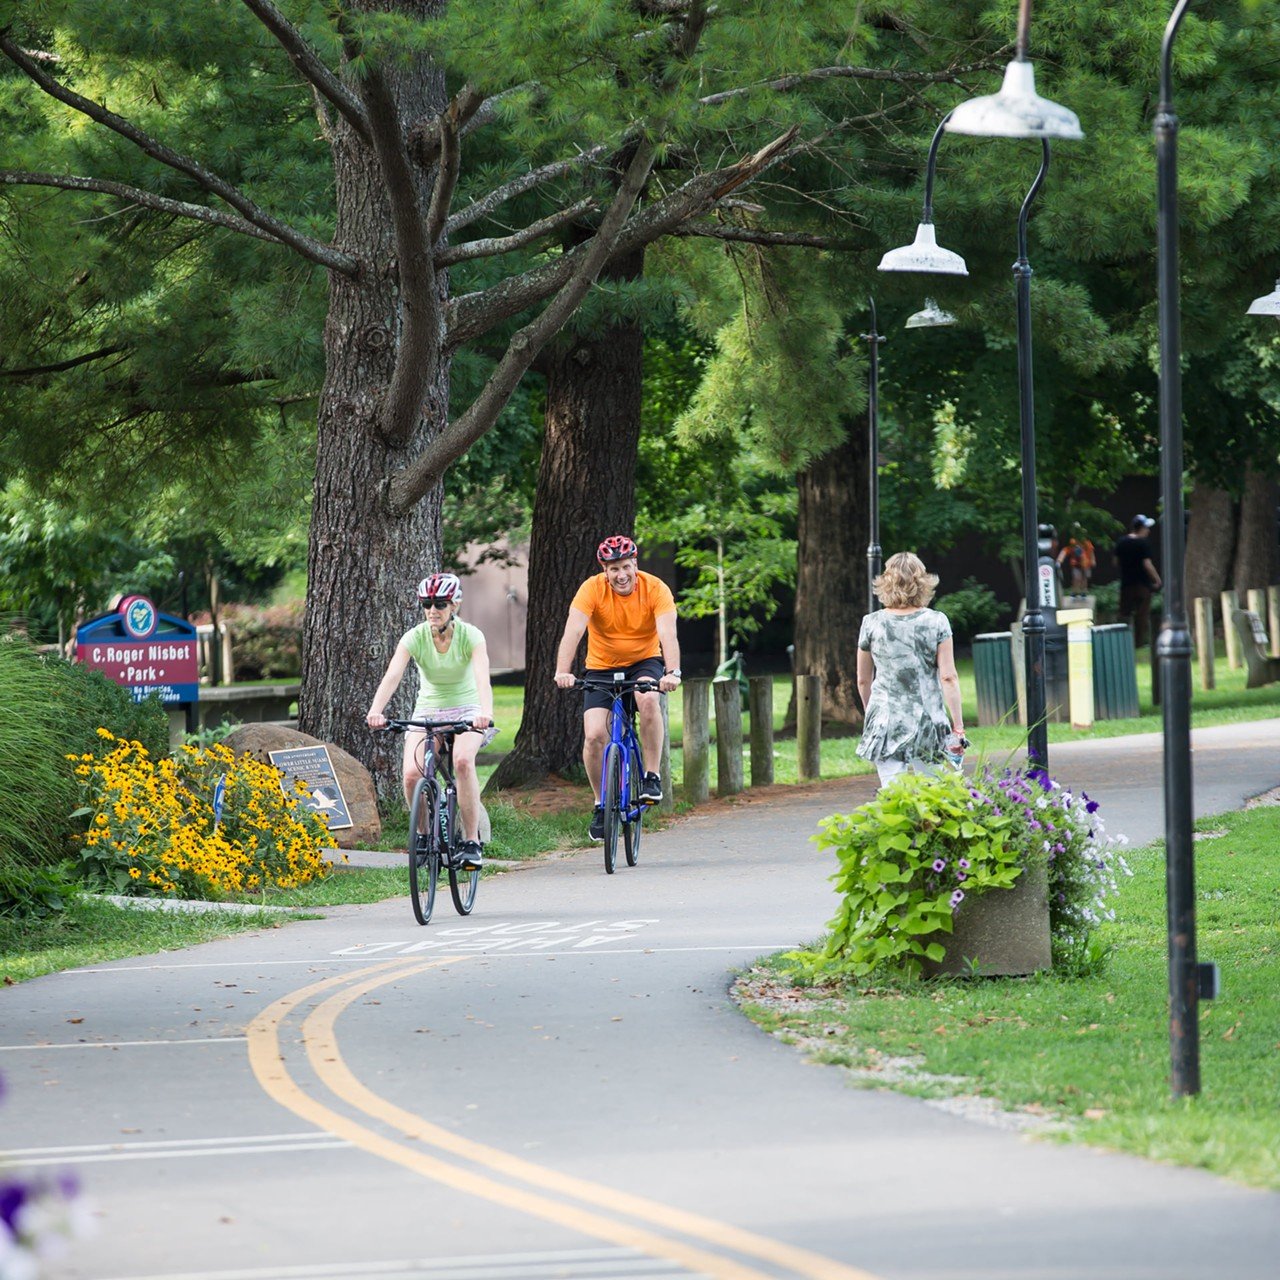 Hit a local bike trail
Looking for the best trails to bike this summer? We asked Wade Johnston, director of area bikeway advocacy group Tri-State Trails, for his recommendations, follow the link to find them. Plan your ride with their “Low-Stress Bike Map” feature. tristatetrails.org.